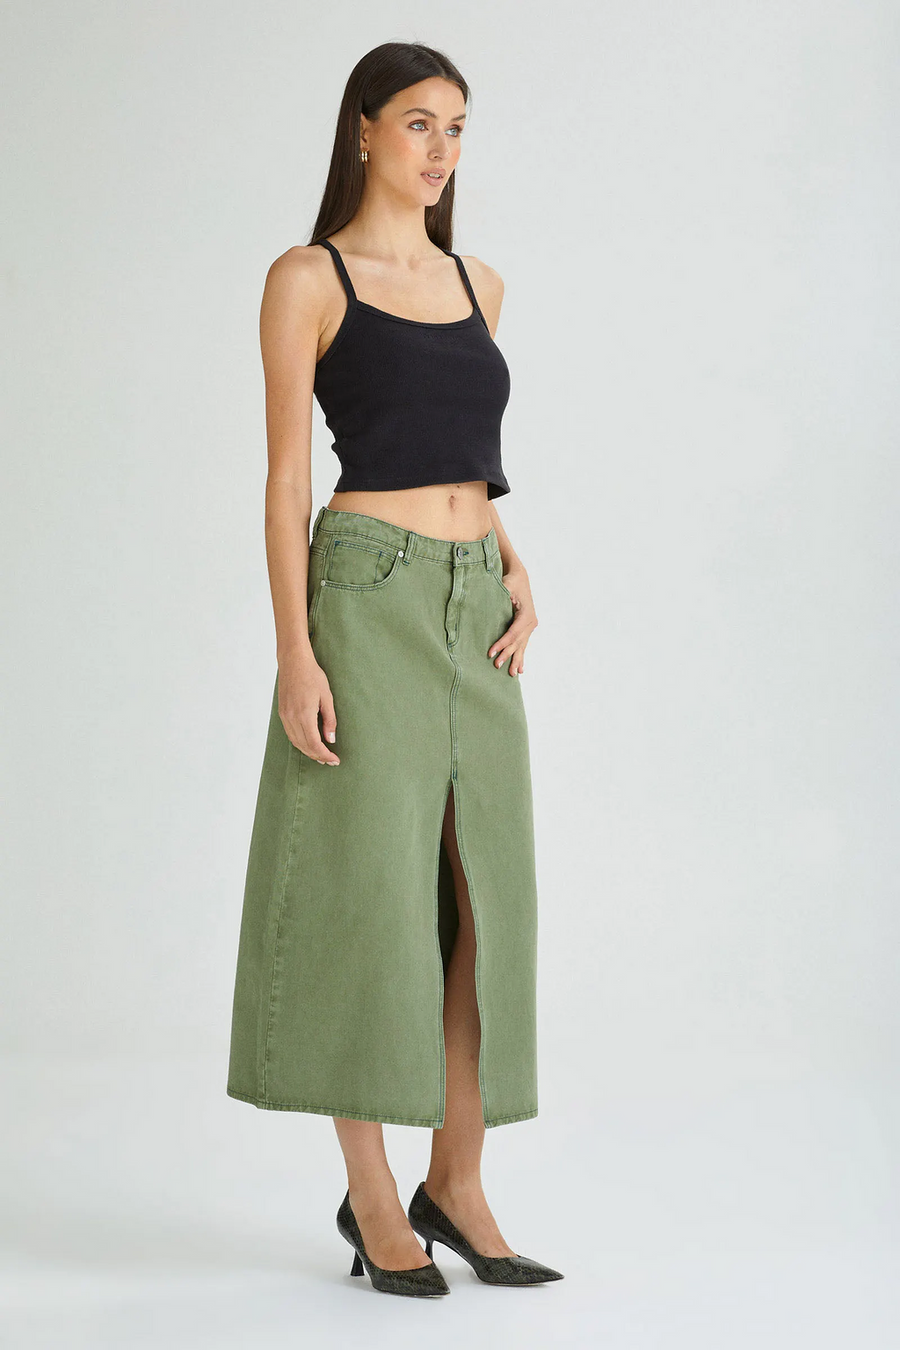 99 Low Maxi Skirt Fade Army by Abrand Jeans - FINAL SALE